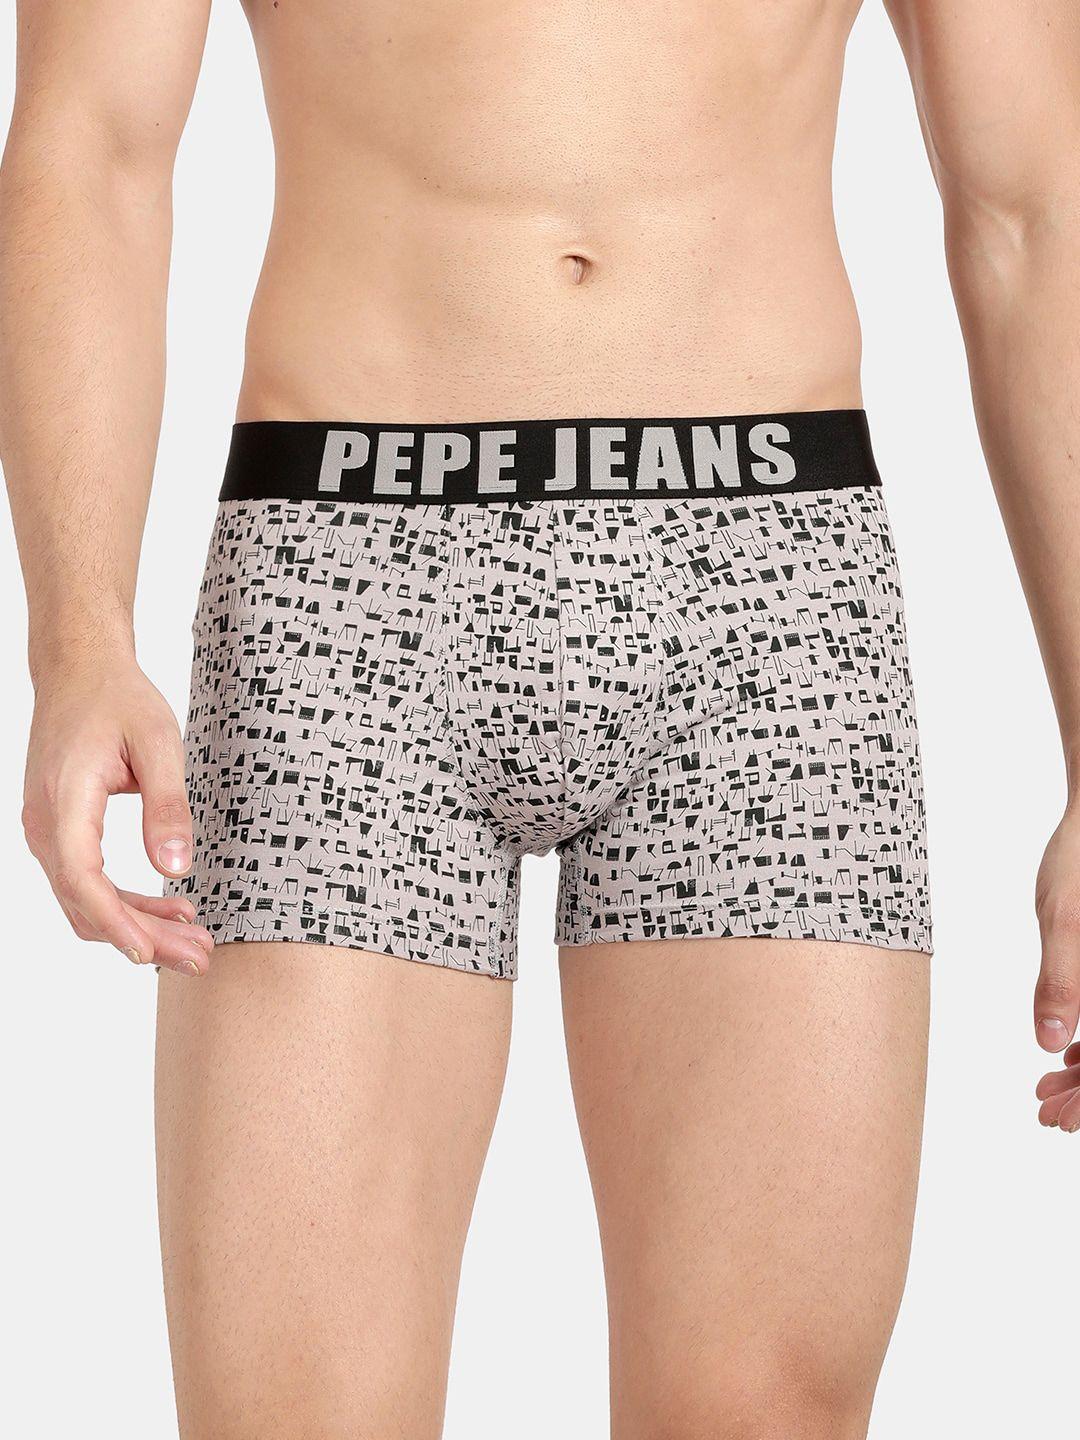 pepe jeans men grey printed cotton trunk opt01-p-mid grey aop-1-s